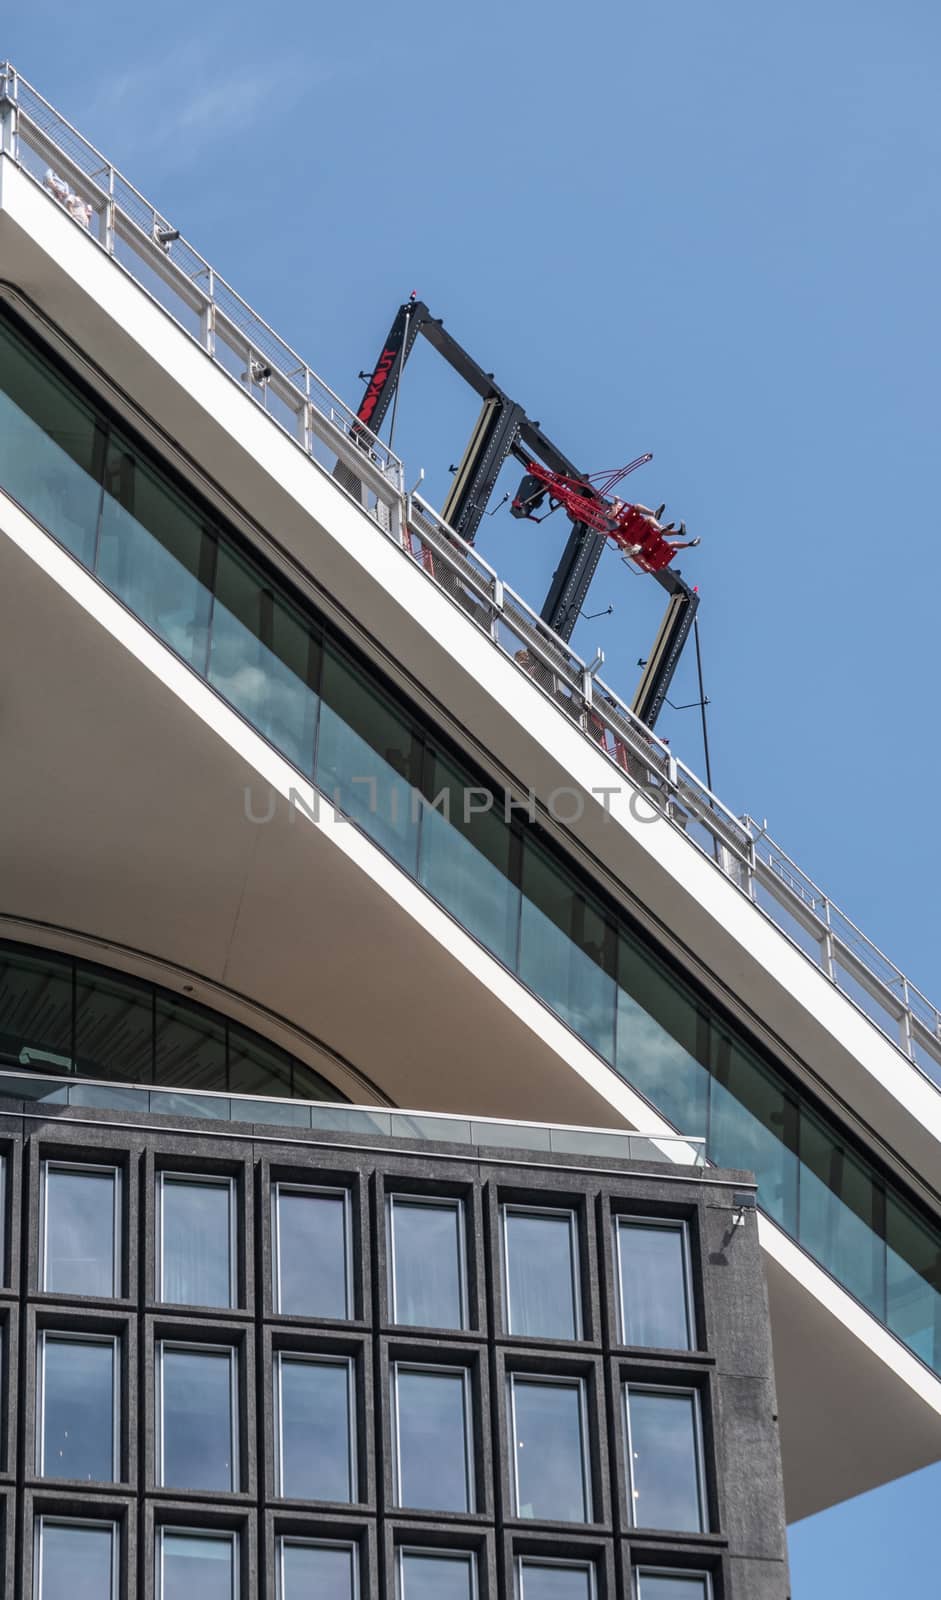 Amsterdam, the Netherlands - June 30, 2019: Closeup of daredevil swing instatllation on top of A’Dam lookout tower against blue sky.